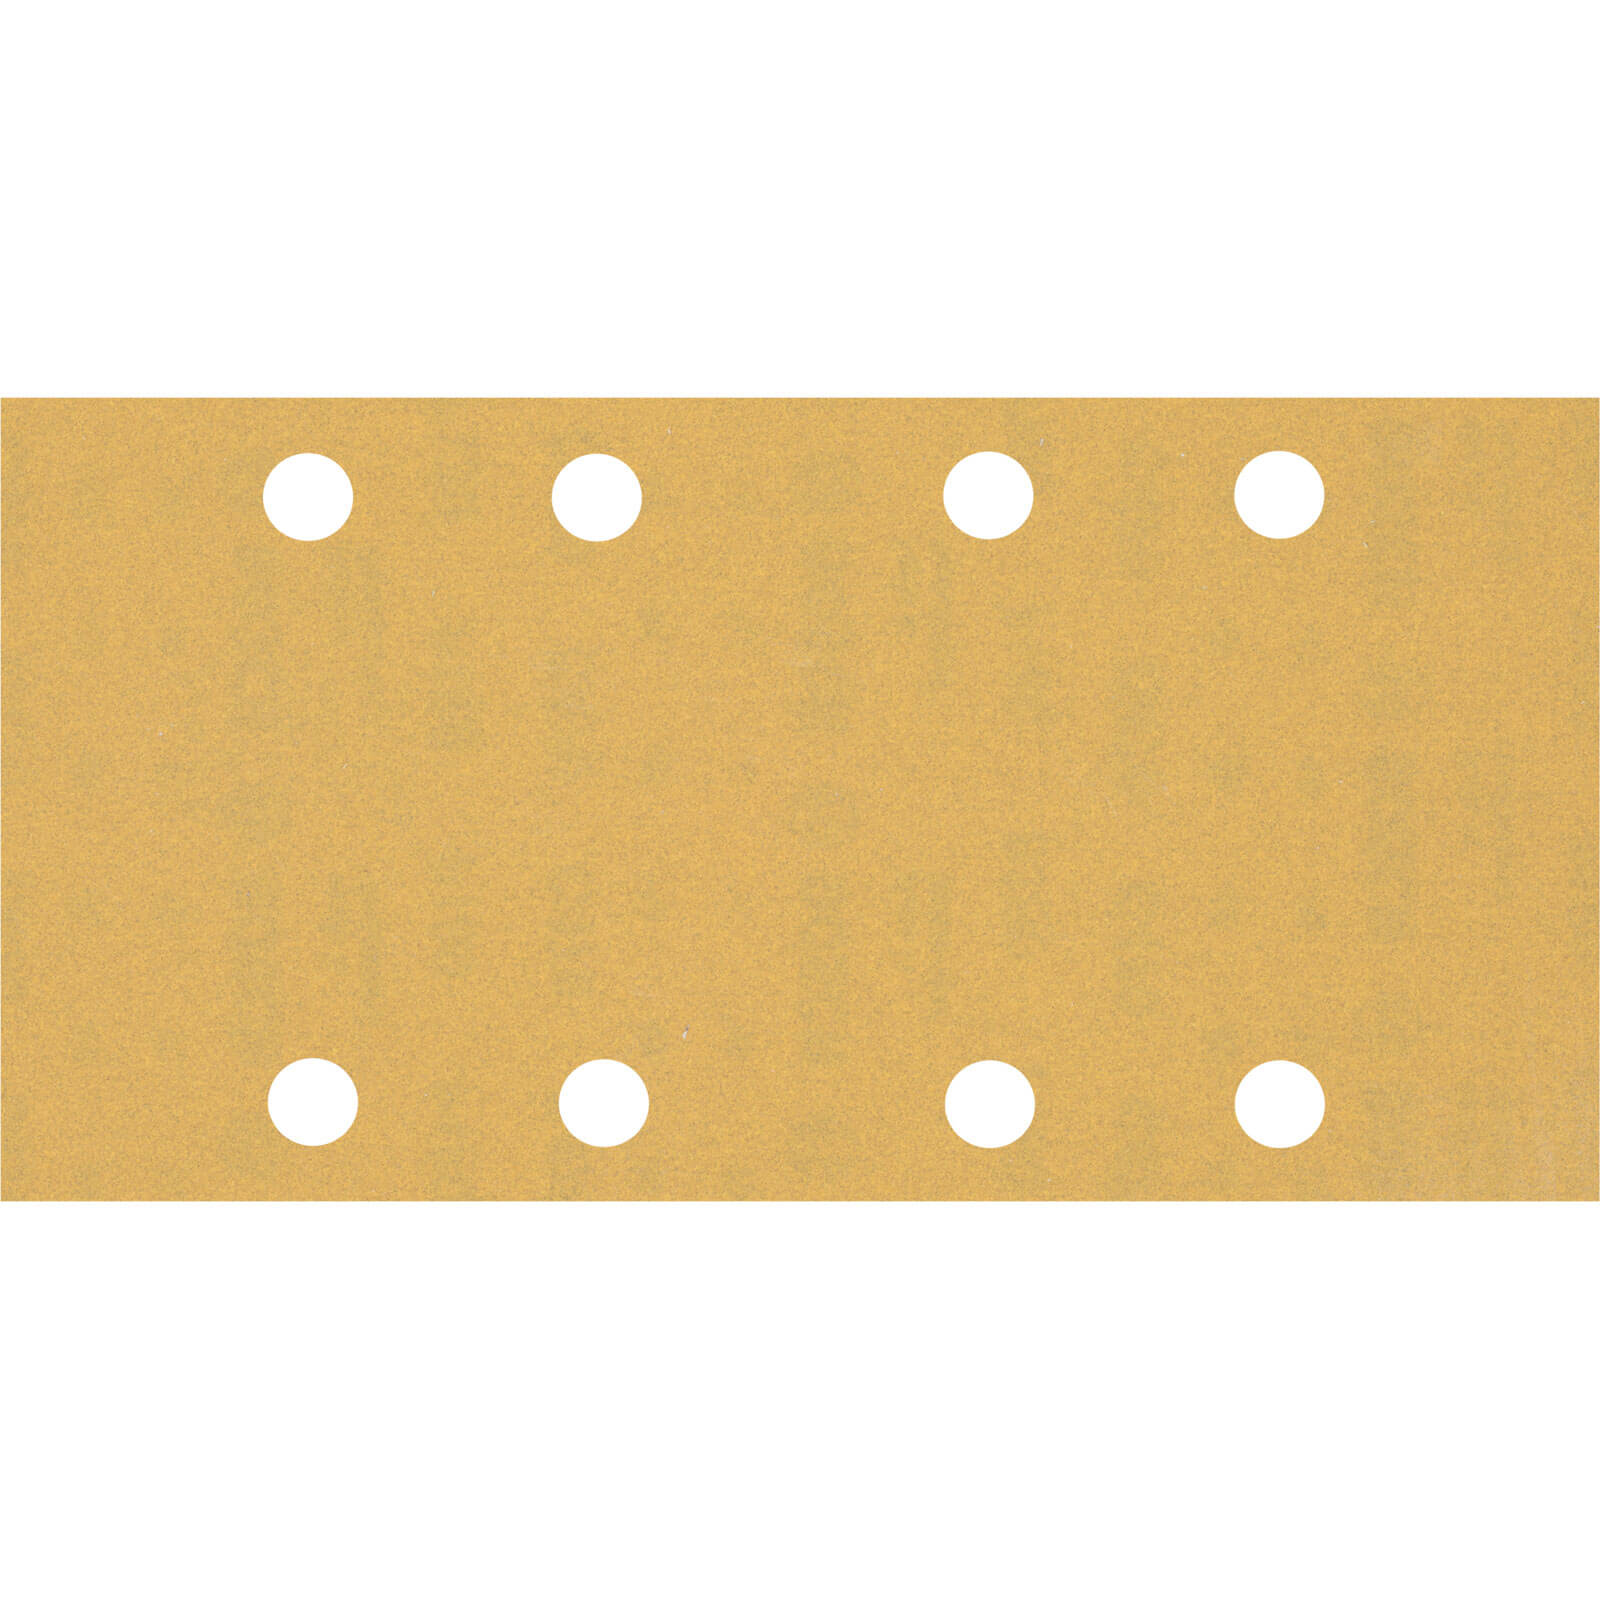 Image of Bosch Expert C470 Punched Hook and Loop Sanding Sheets 93mm x 186mm 120g Pack of 50